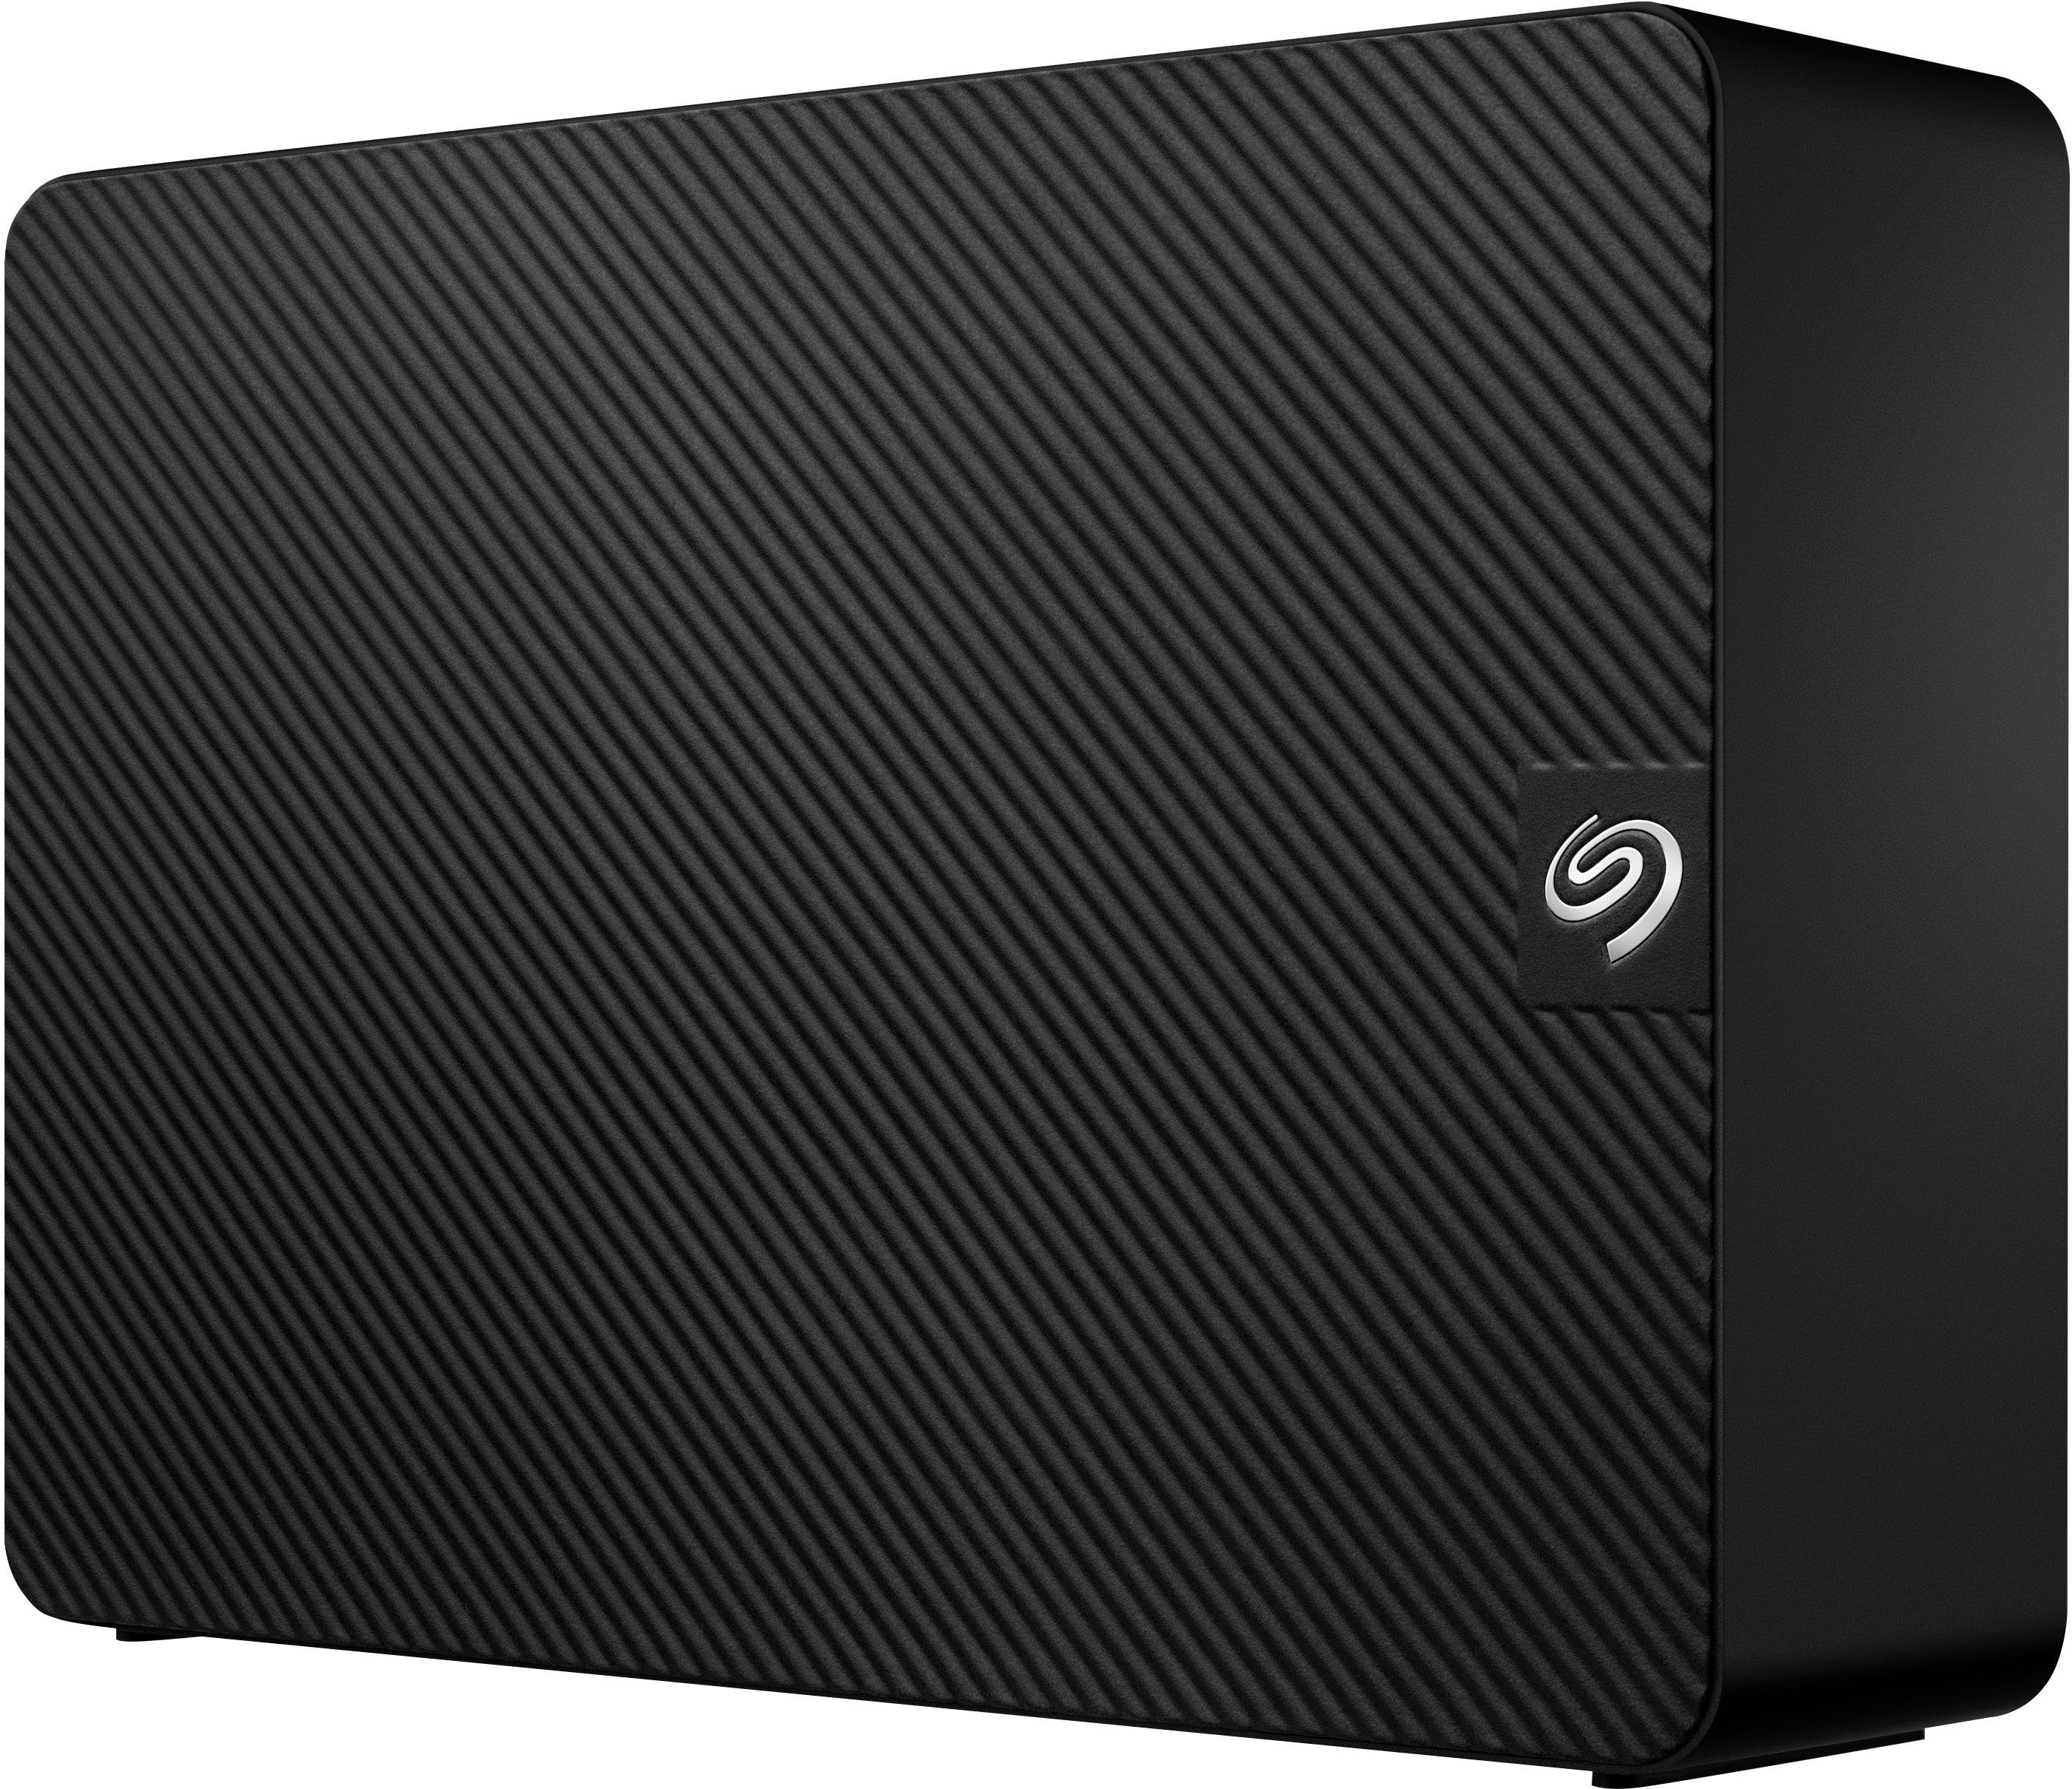 Angle View: Seagate - Expansion 14TB External USB 3.0 Portable Hard Drive with Rescue Data Recovery Services - Black